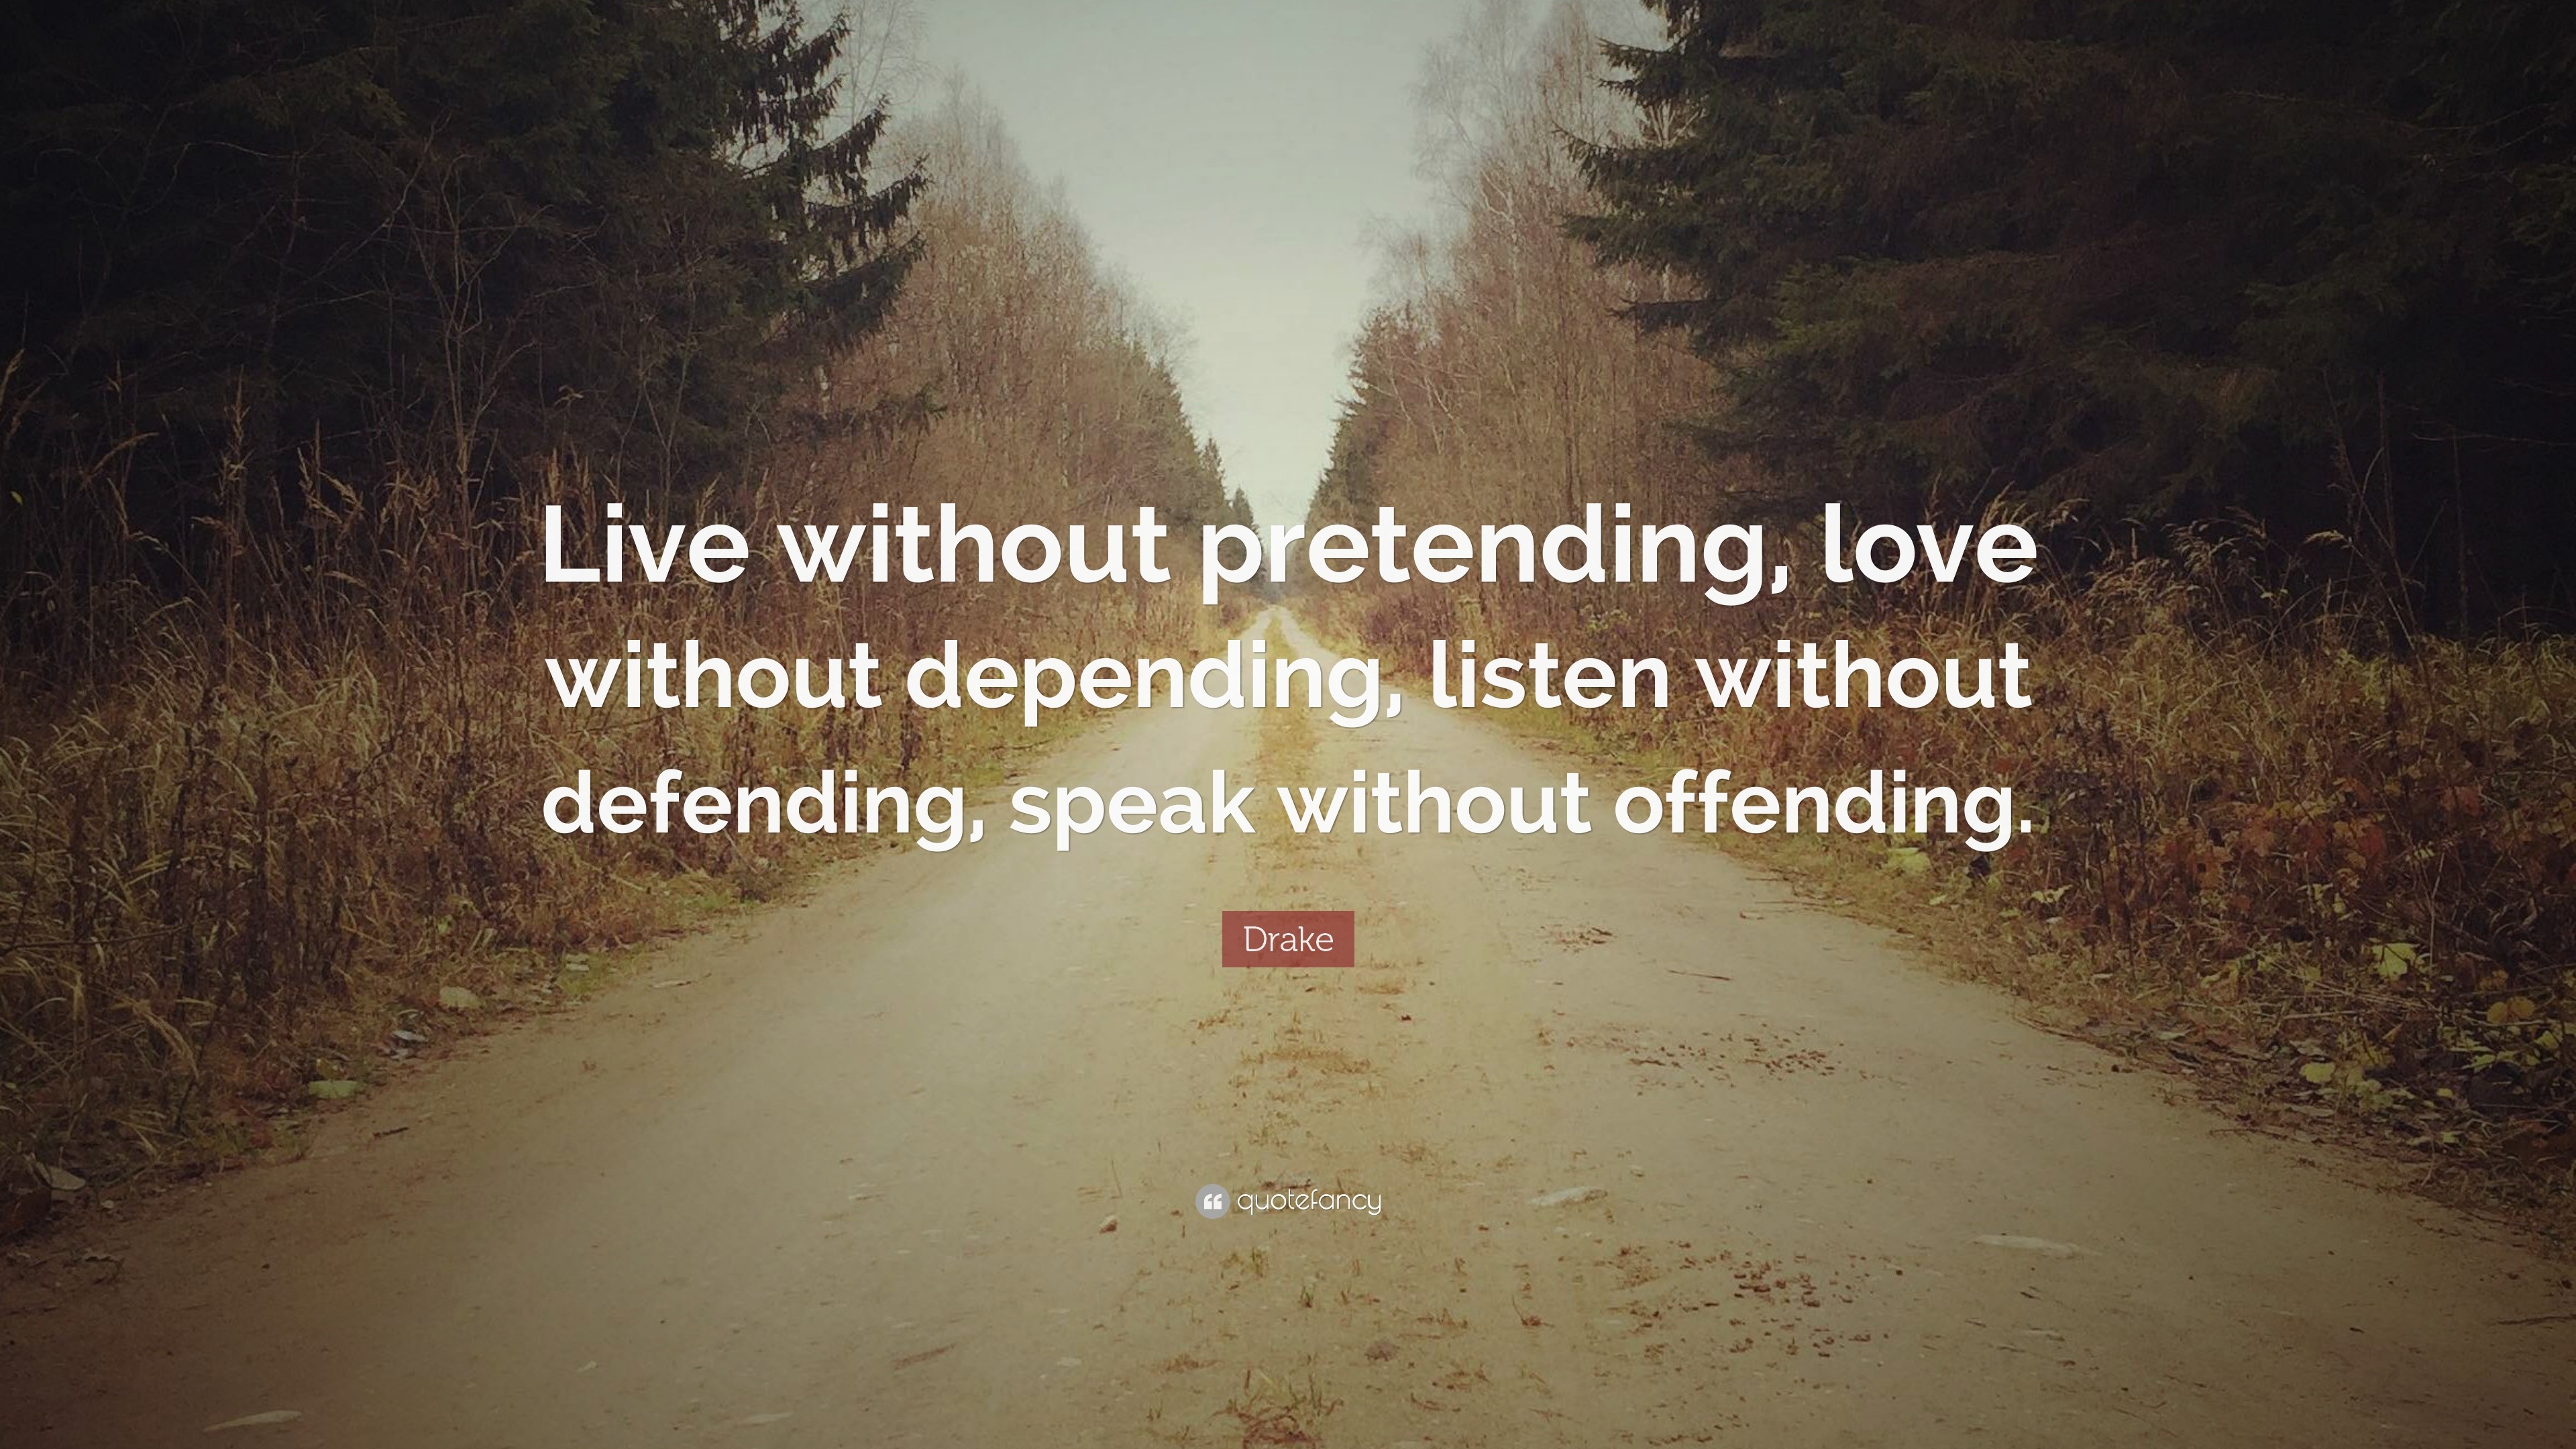 Drake Quote: "Live without pretending, love without depending, listen without defending, speak ...